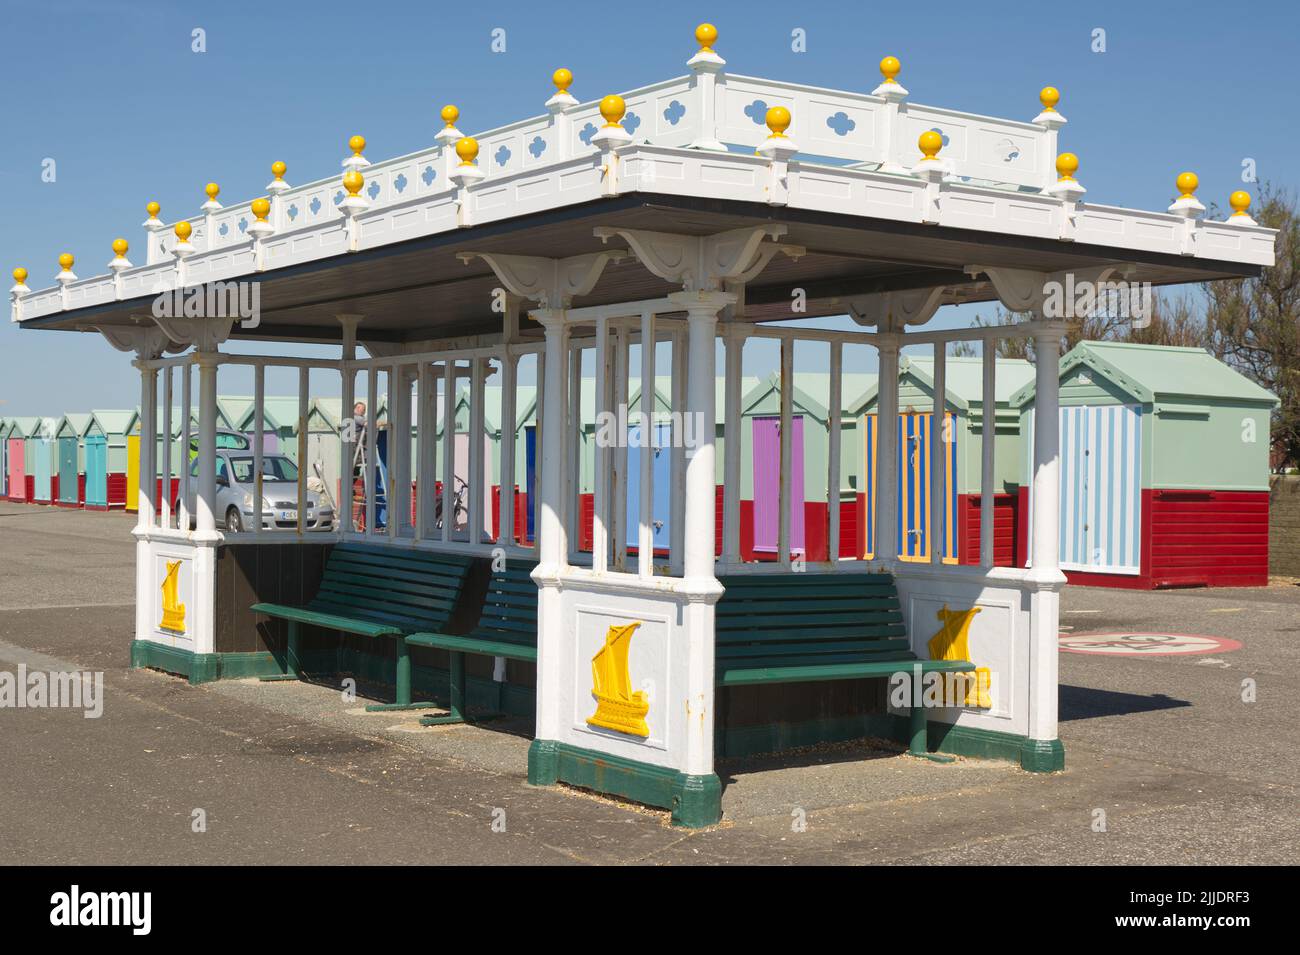 Shelter with bench seating on the seafront promenade at Hove, Brighton, East Sussex, England Stock Photo